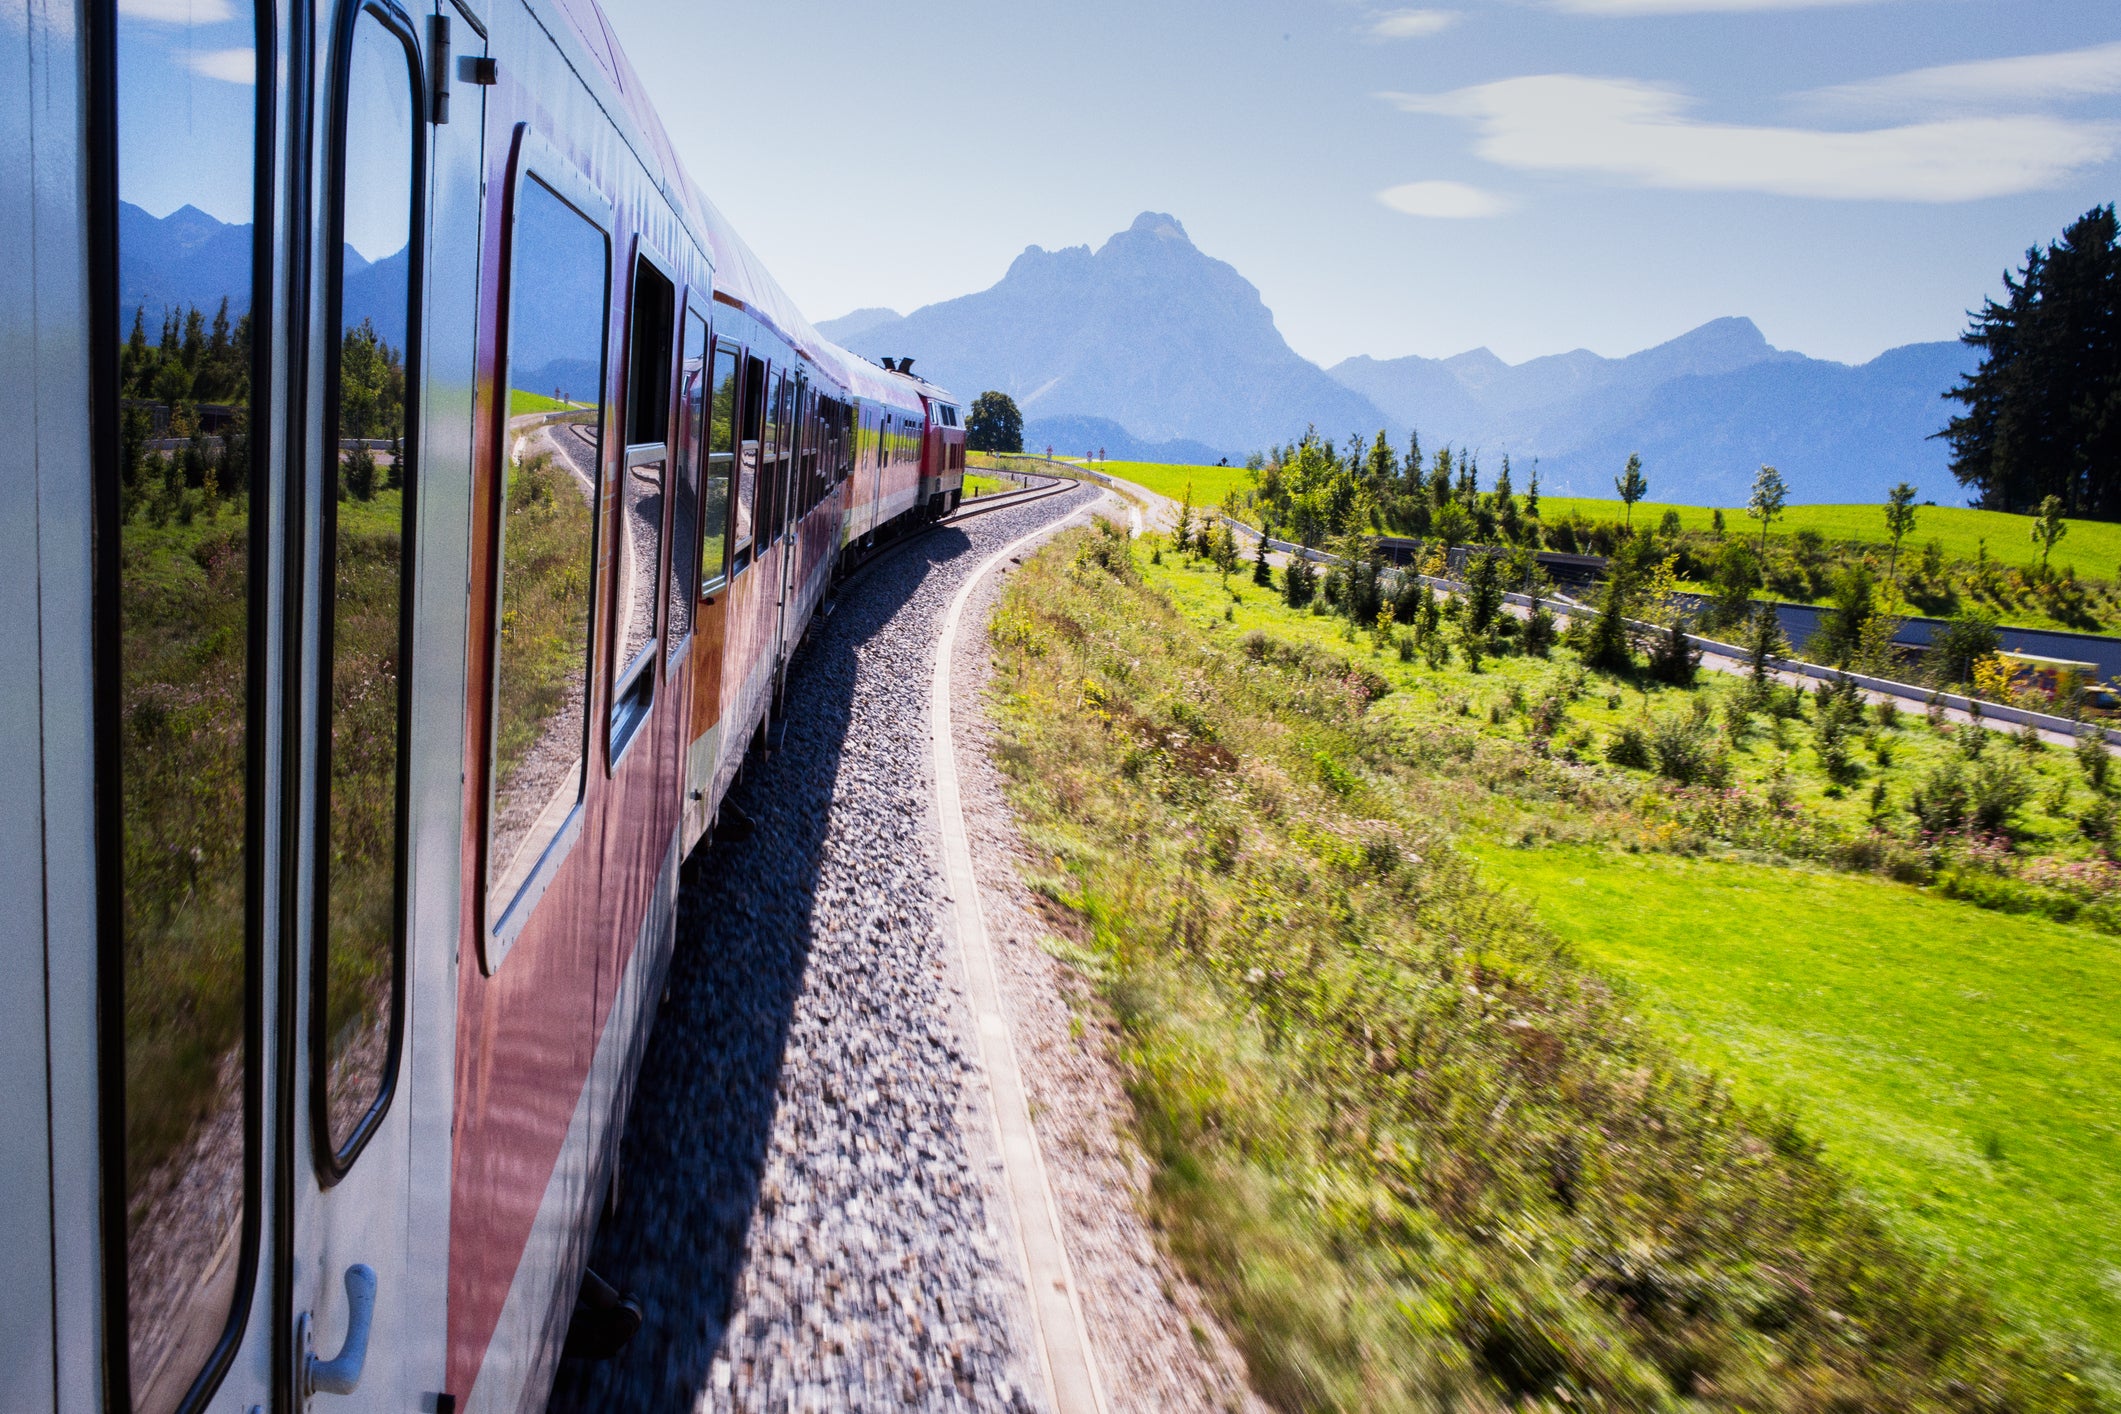 Adult 10 day Interrail passes are on sale for just £272